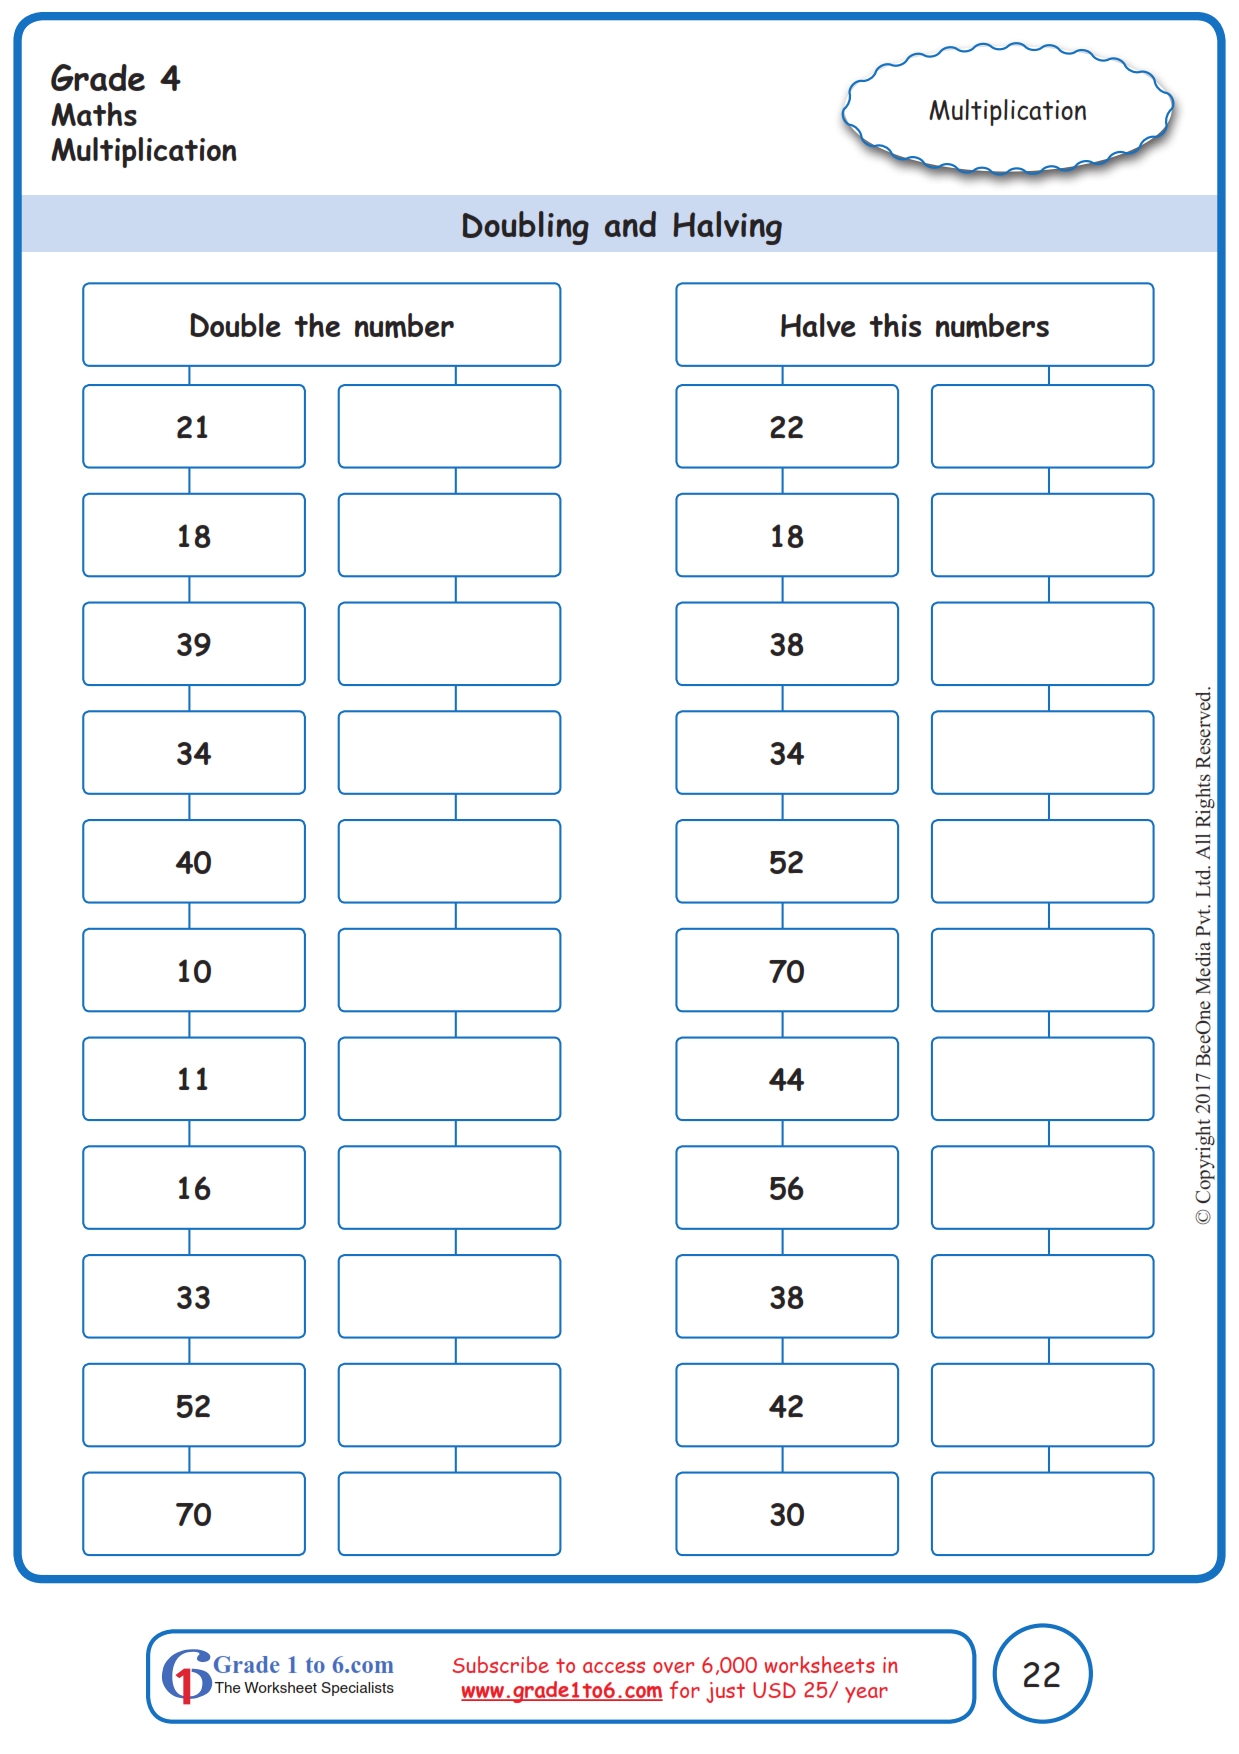 multiplication-strategy-doubling-halving-worksheets-www-grade1to6